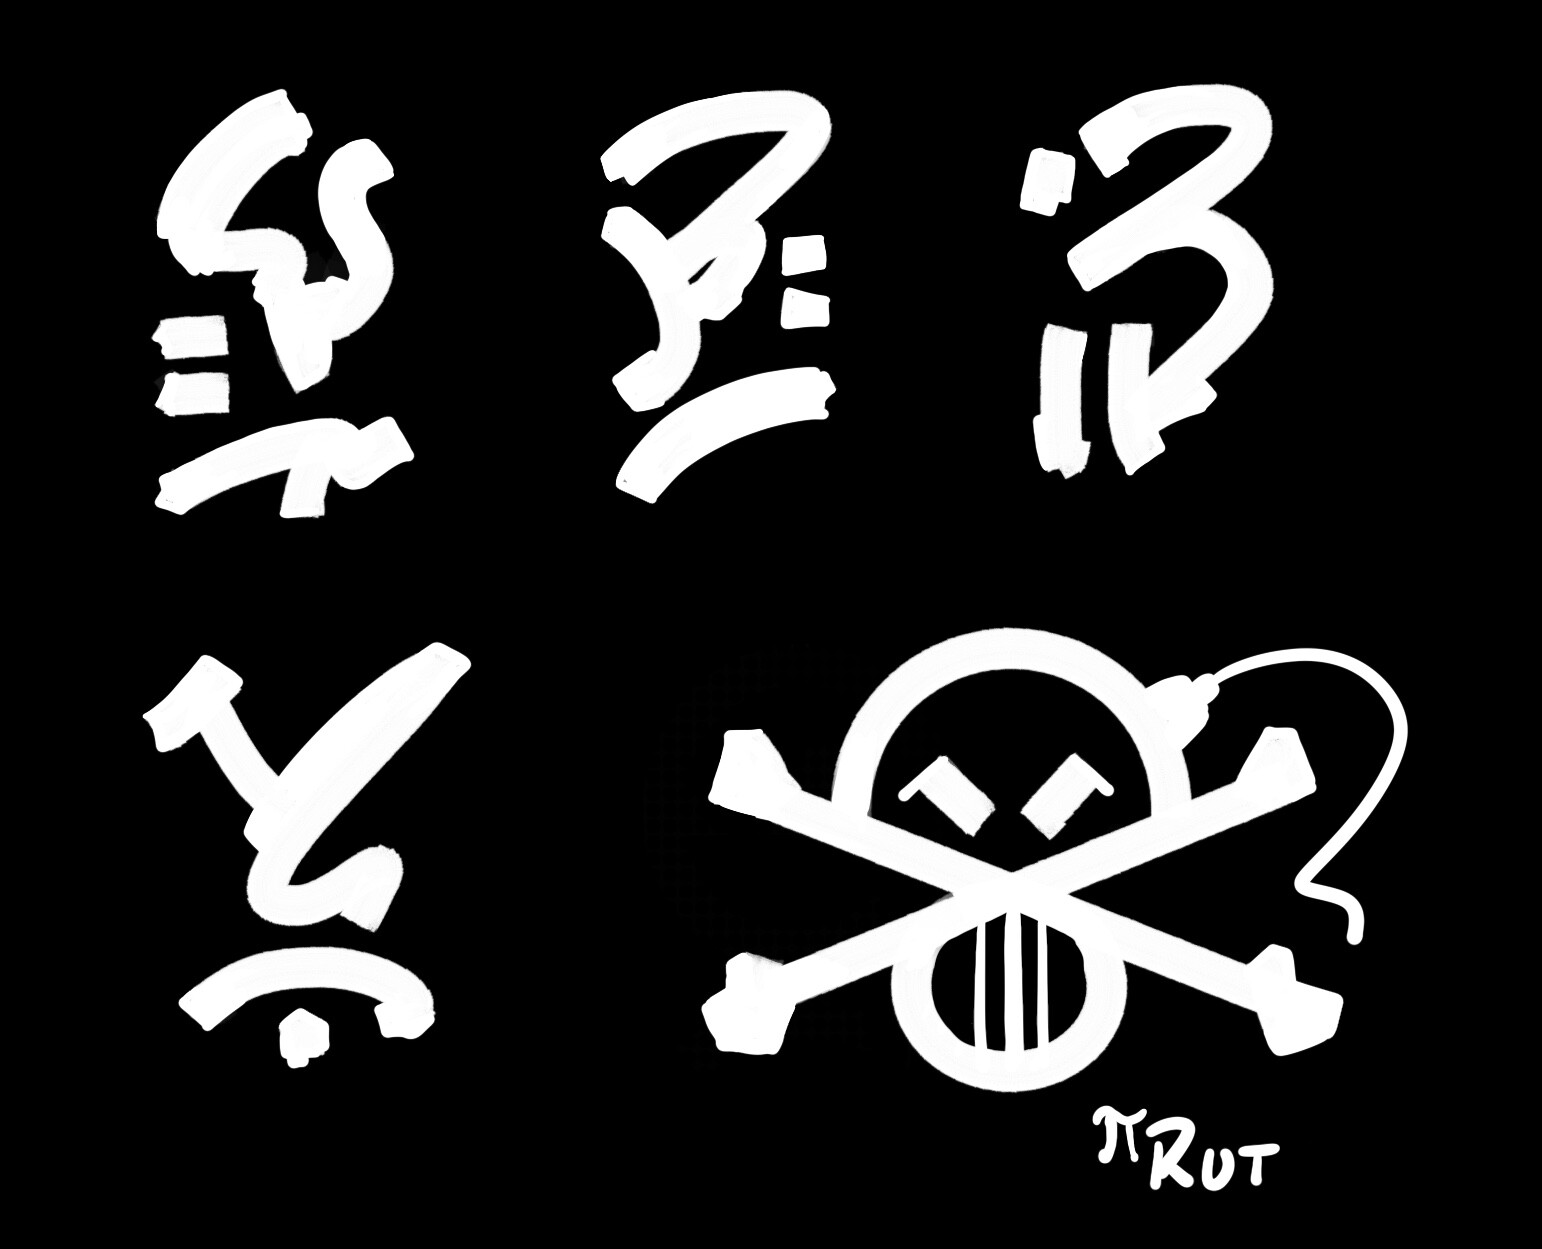 Quick logo/glyph designs used in the animation.